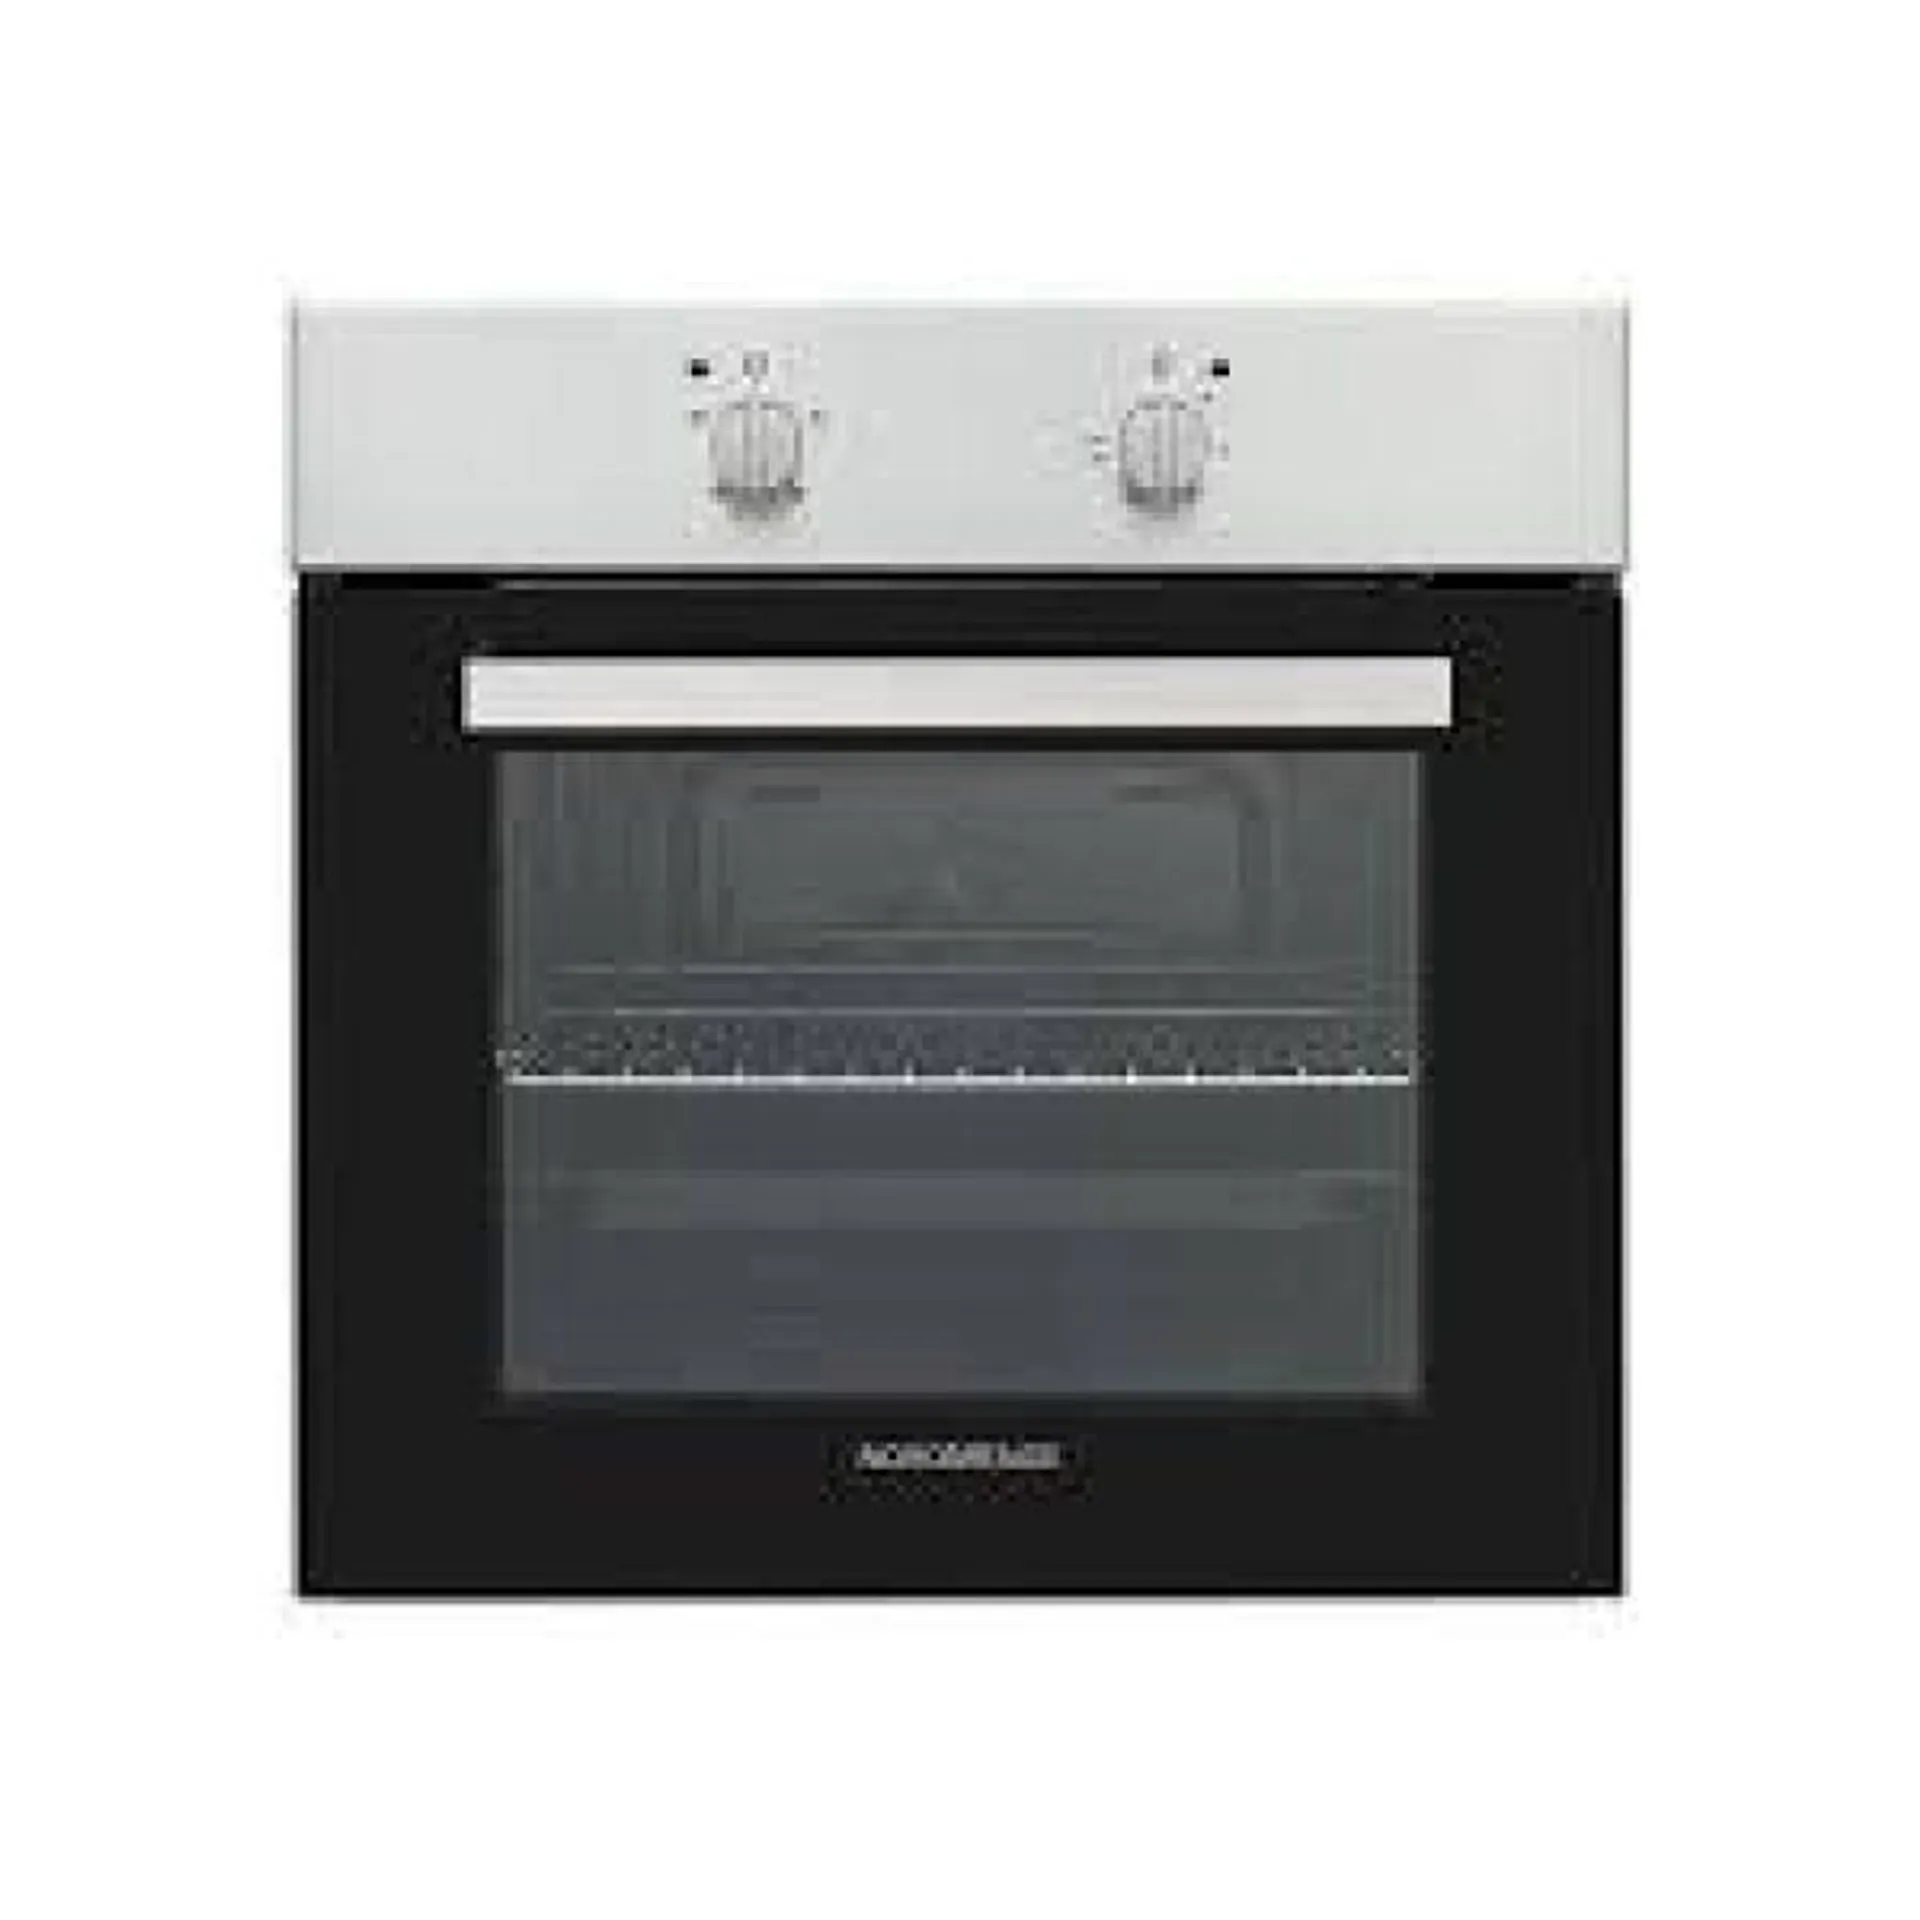 Nordmende Built In Single Oven – Stainless Steel